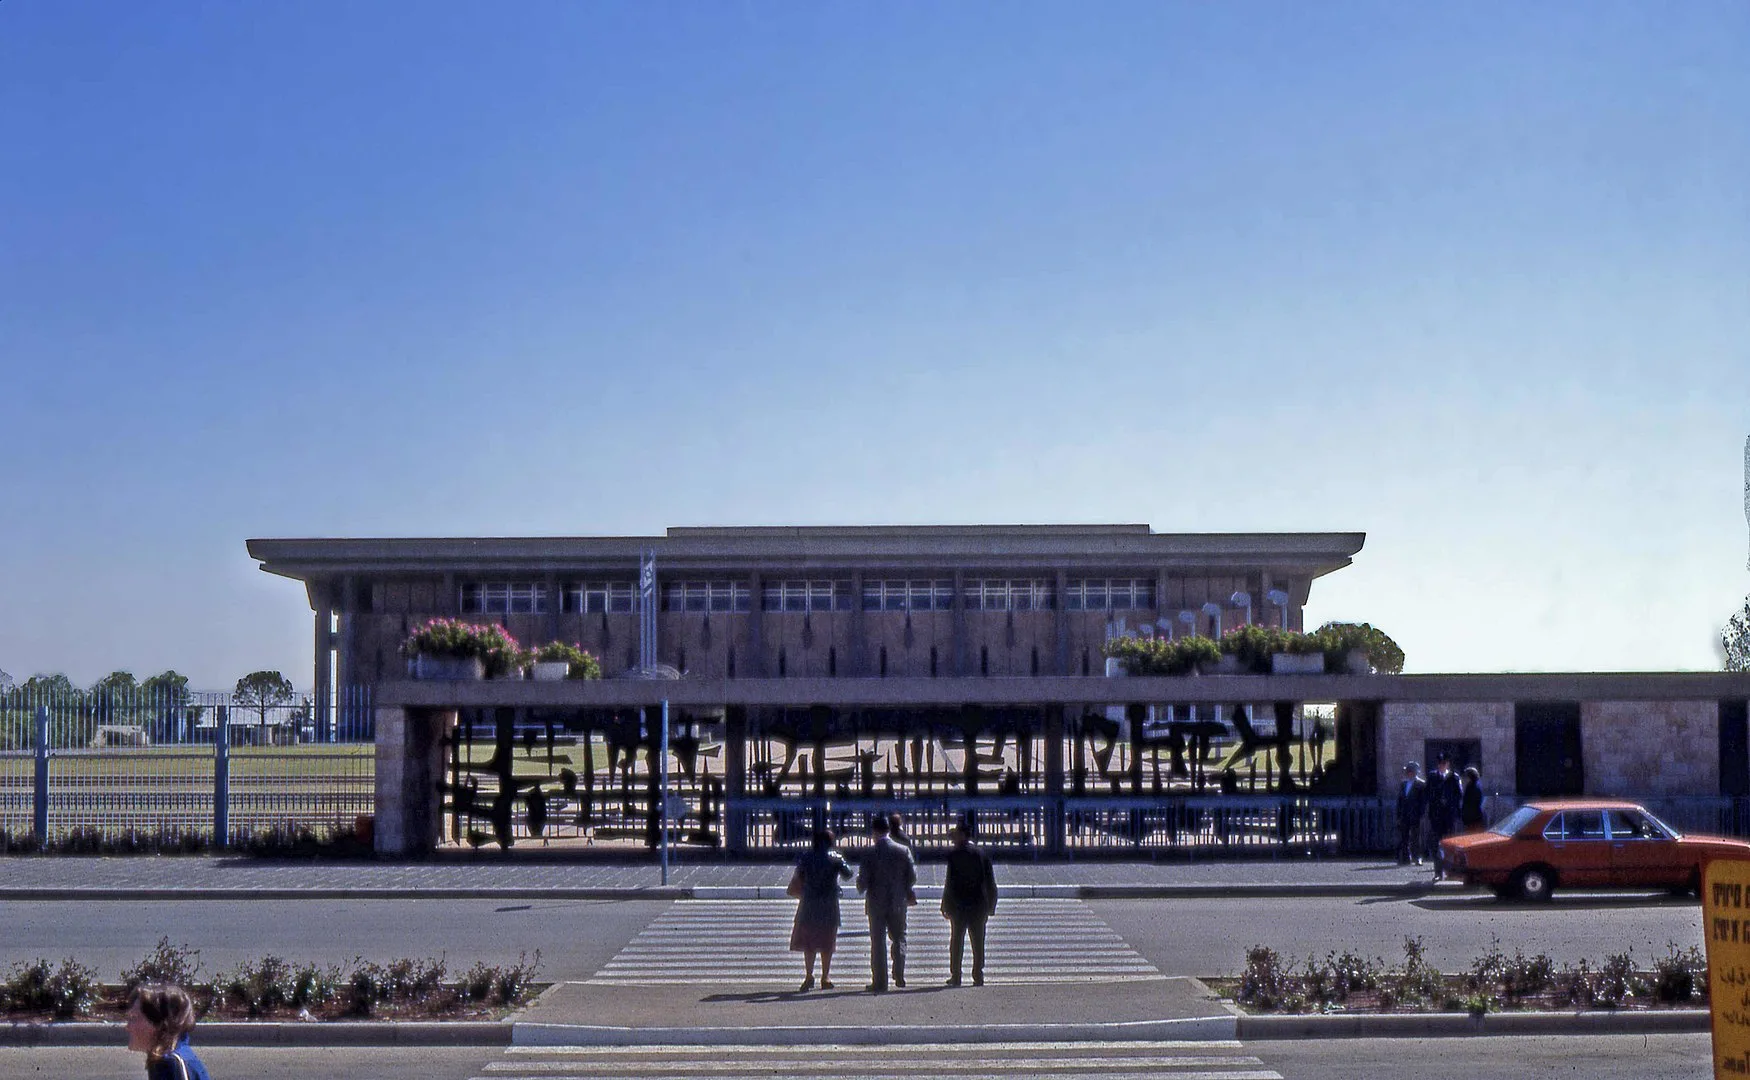 The Knesset, the Israeli parliament, building, in Jerusalem. Photography by Leif Knutsen